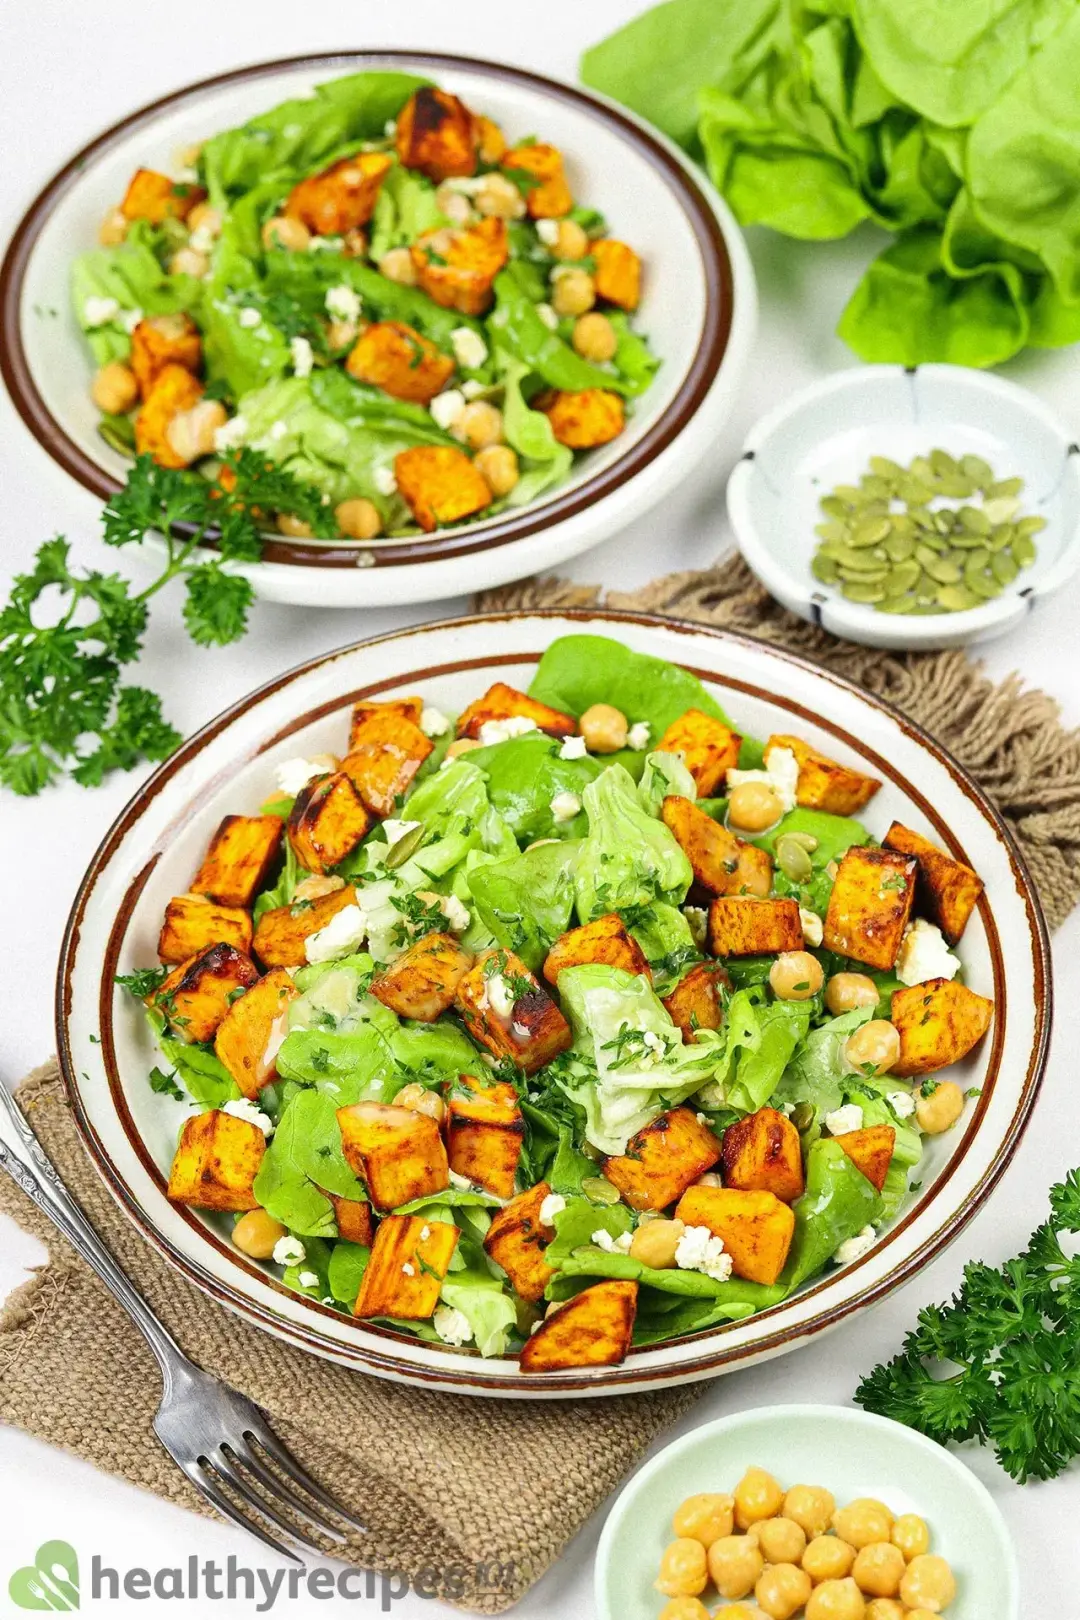 How to Store the Leftovers sweet potato salad